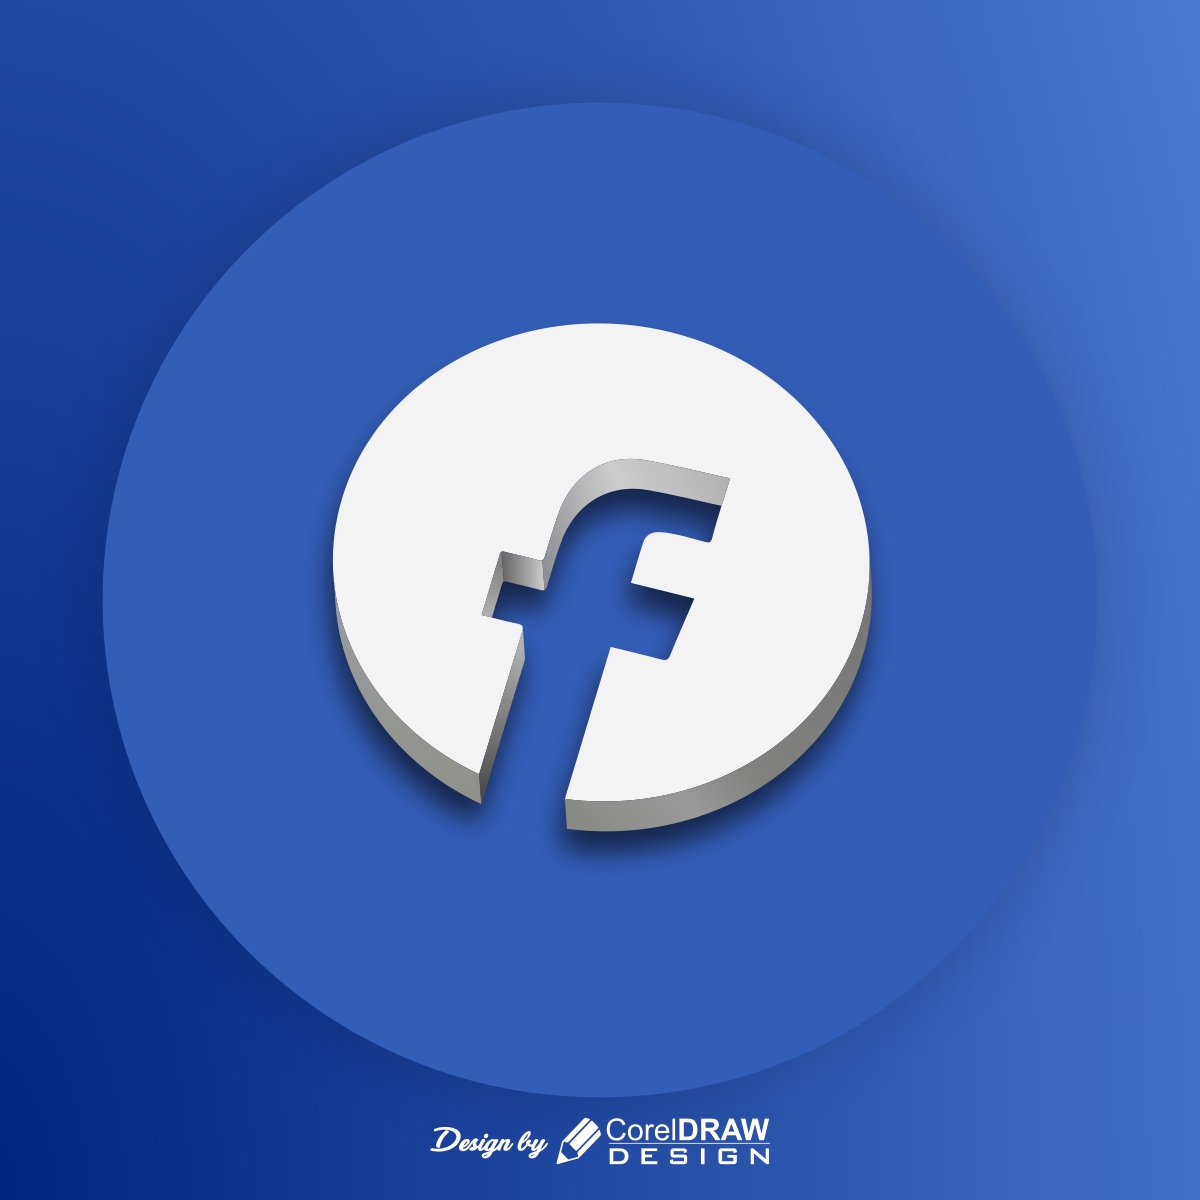 Download Facebook Logo with color theme background | CorelDraw Design  (Download Free CDR, Vector, Stock Images, Tutorials, Tips & Tricks)